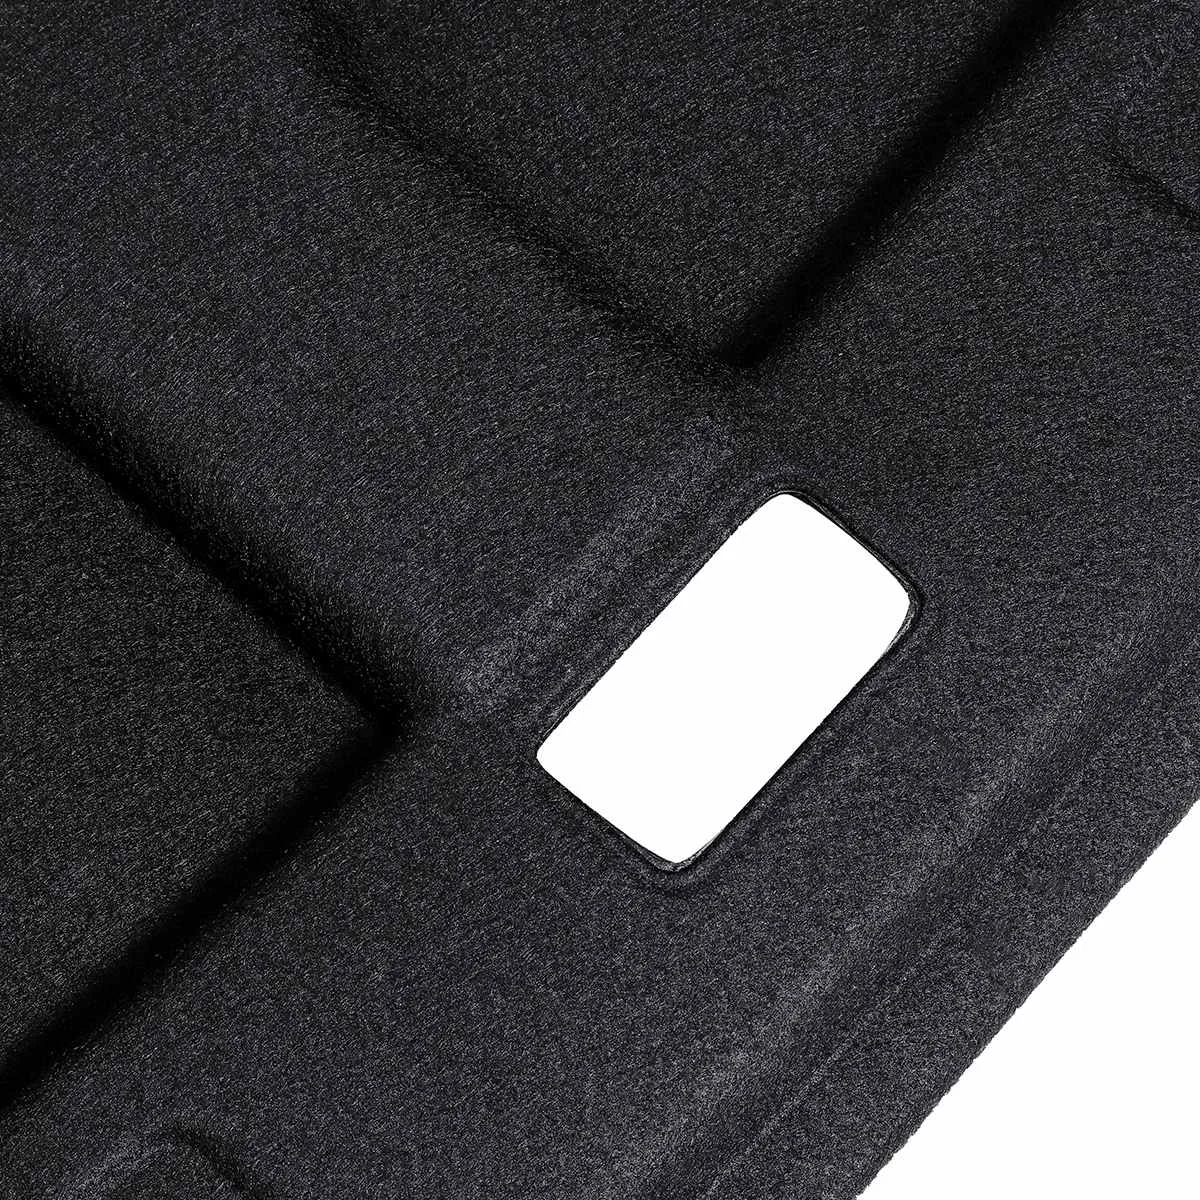 Car Rear Trunk Soundproof Cotton Mat Sound Proof Deadening Protective Sticker Cover For Toyota Avalon